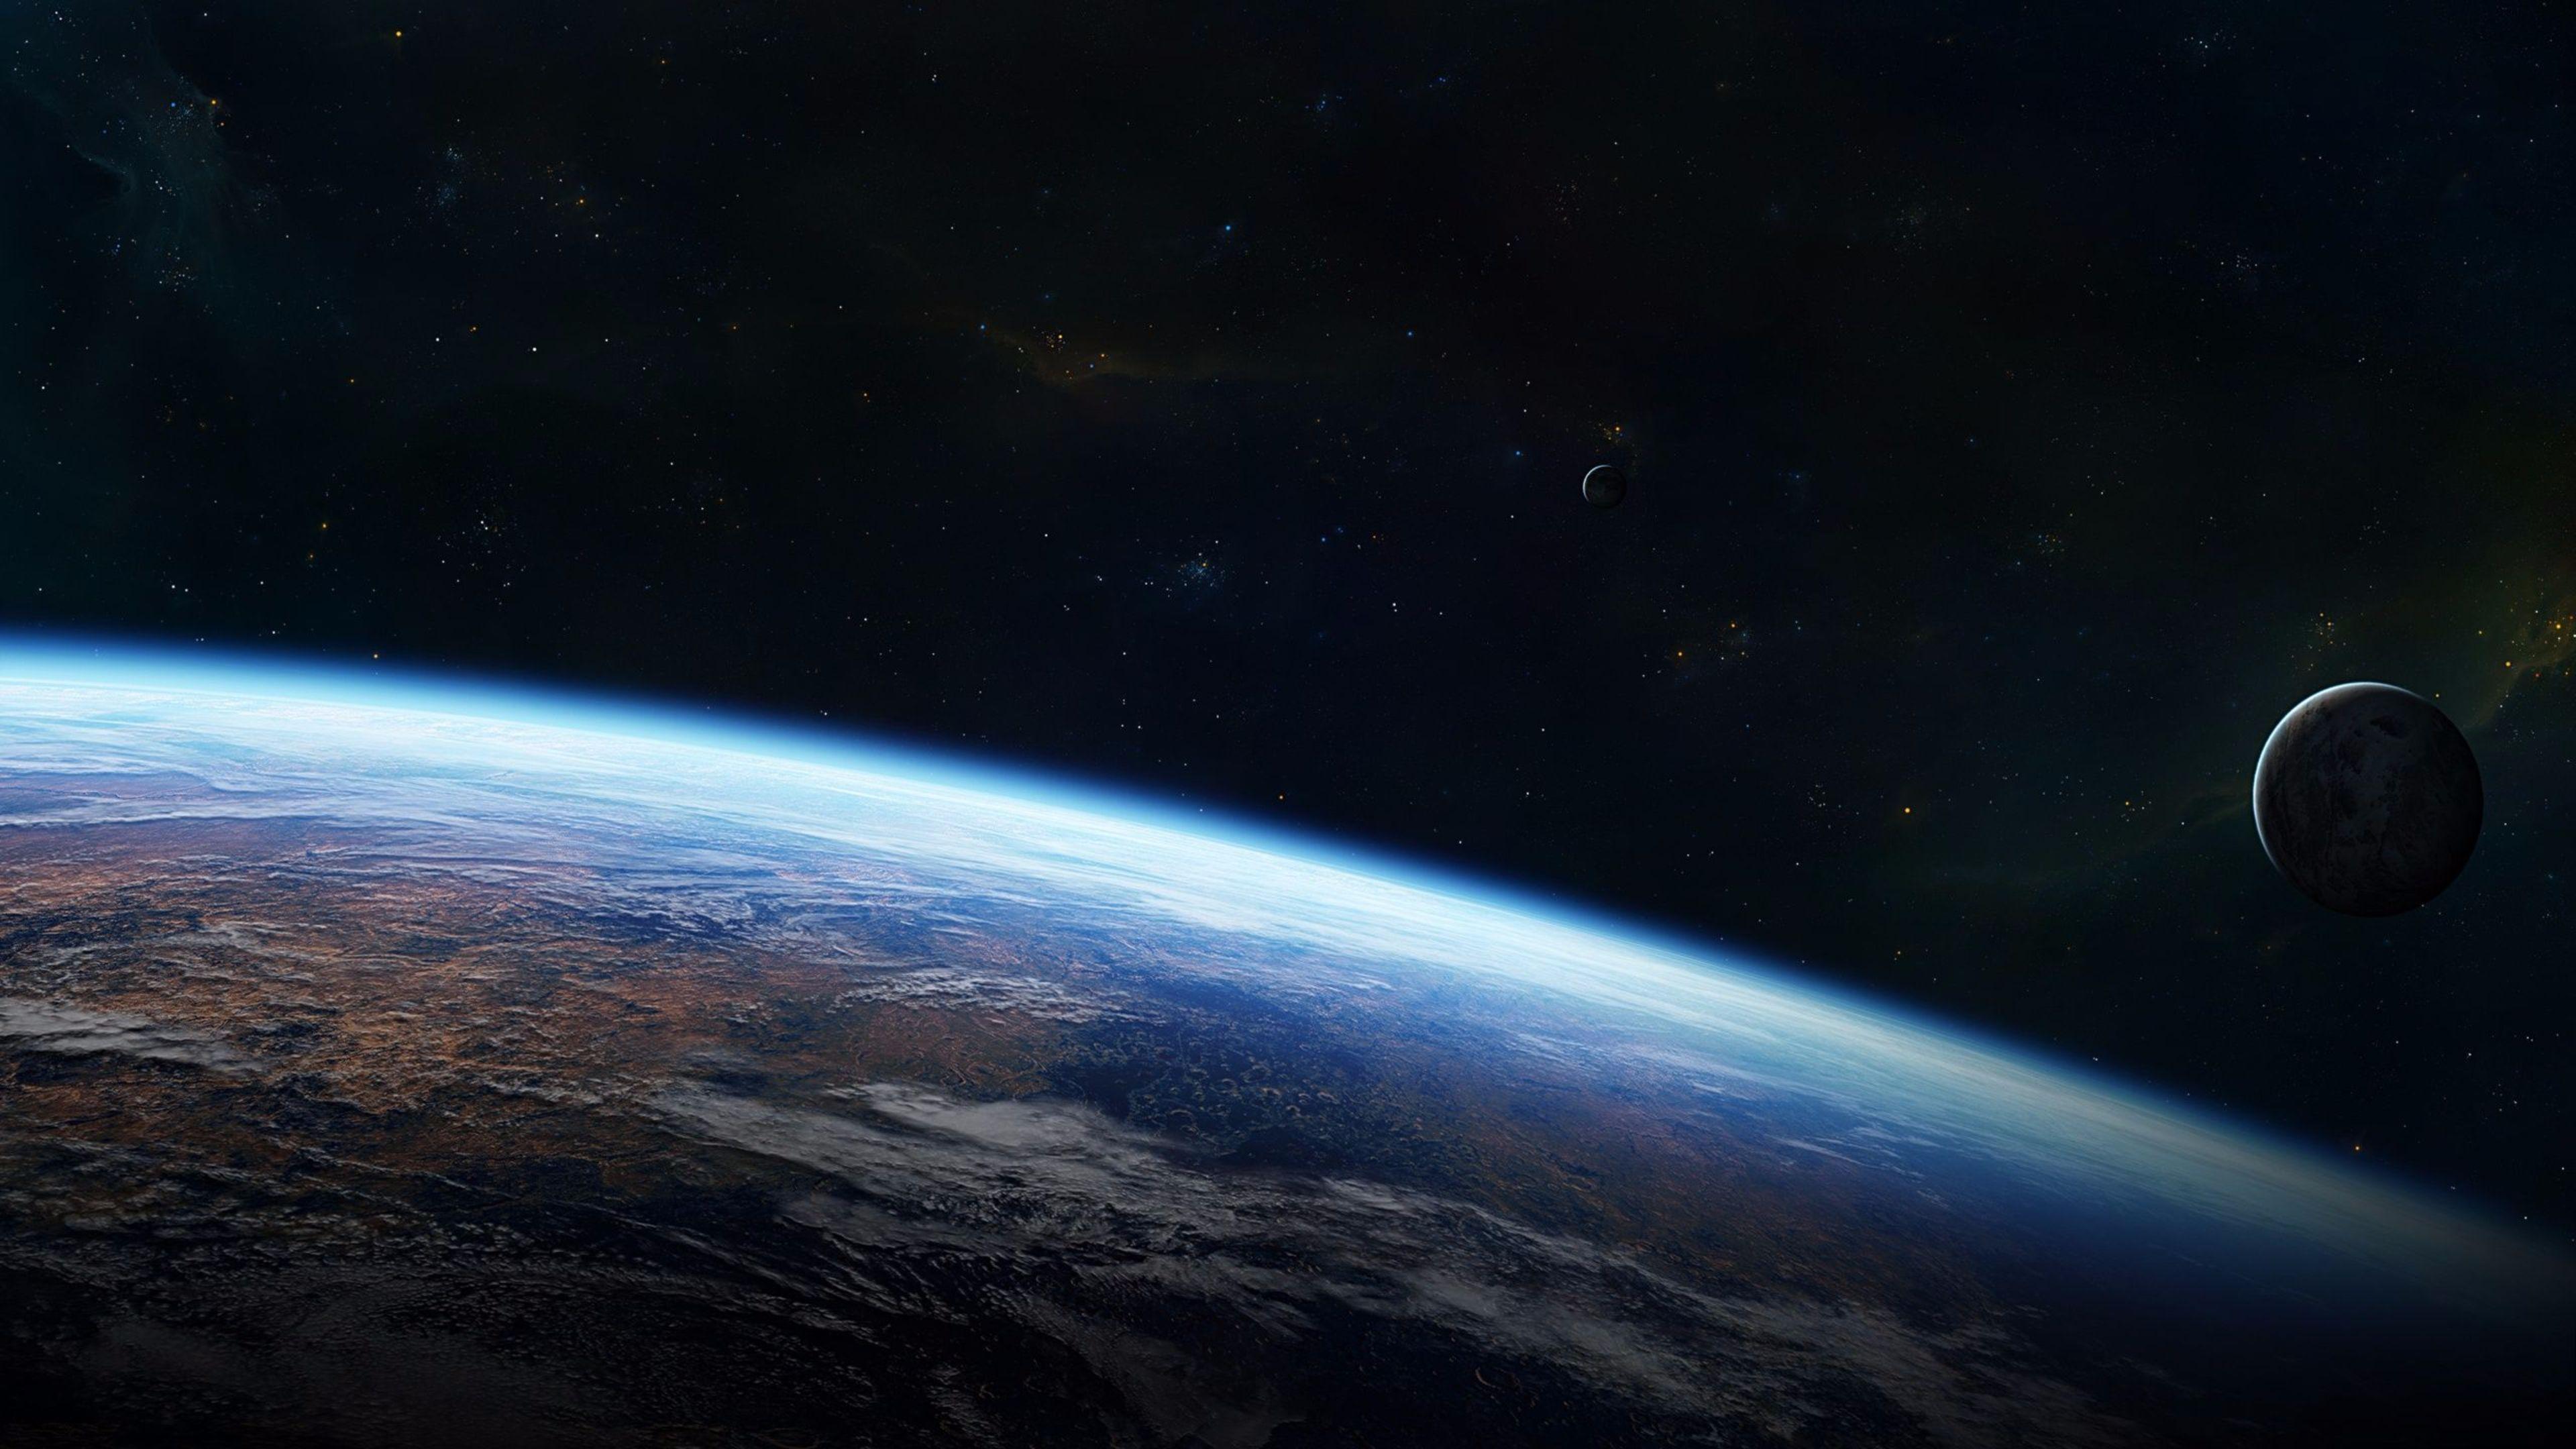 Earth From Space Wallpaper 4k | Mister Wallpapers